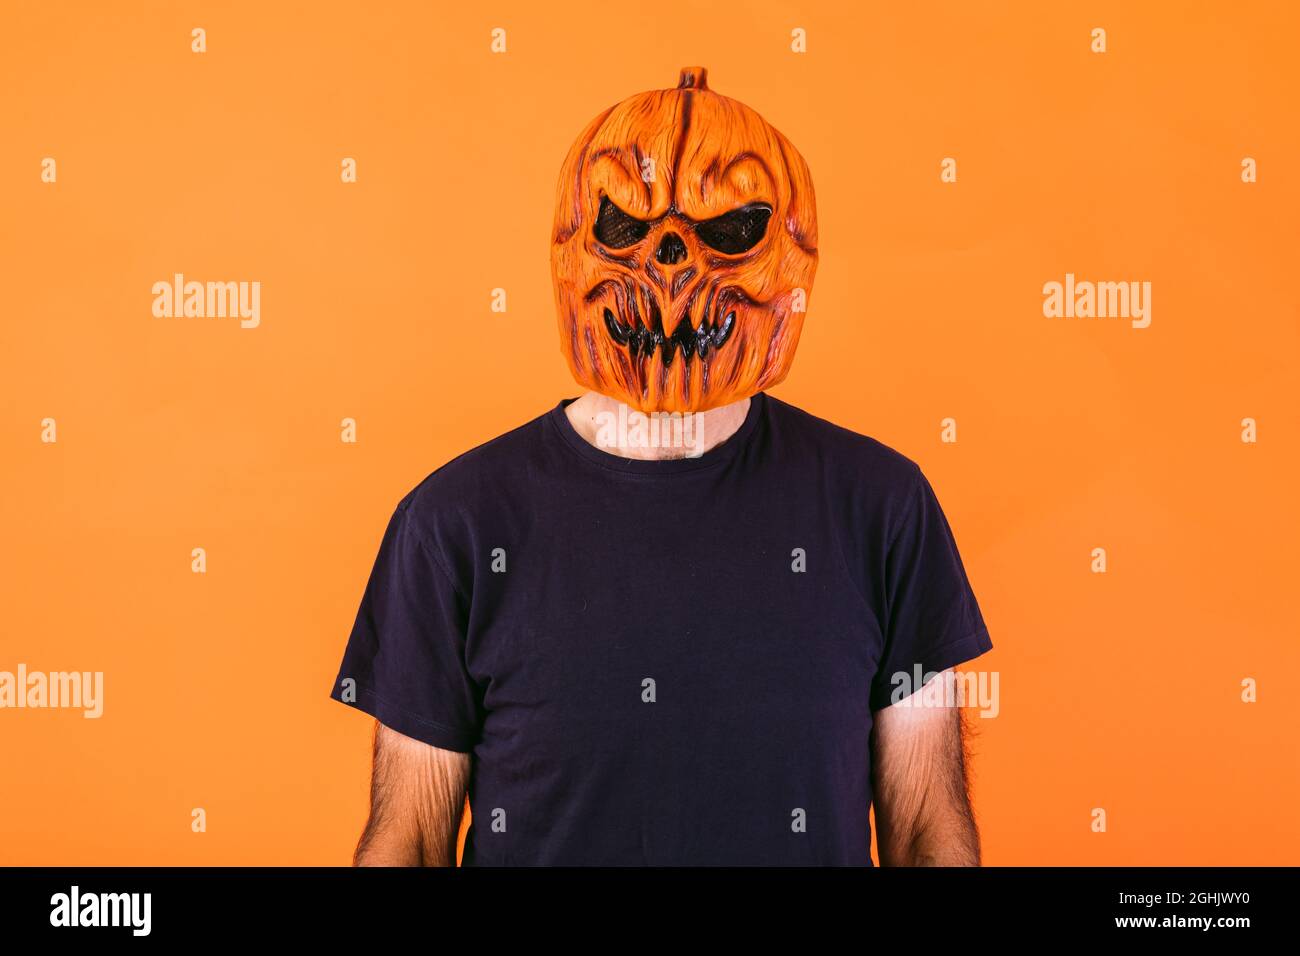 Man wearing scary pumpkin latex mask with blue t-shirt on orange background. Halloween and days of the dead concept. Stock Photo